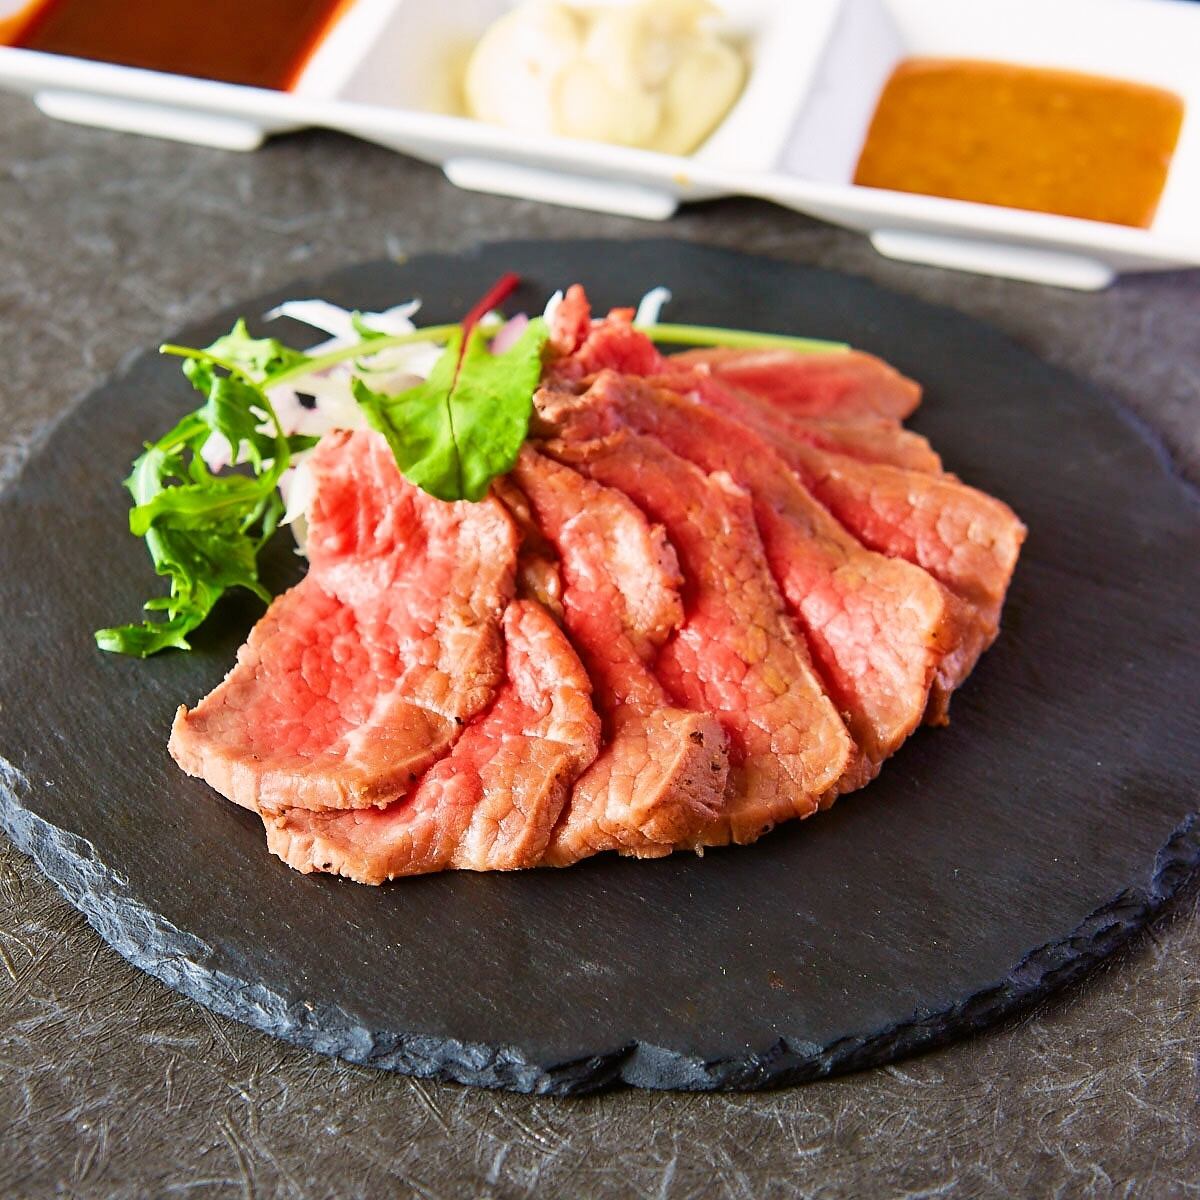 You can choose the sauce you want, and it's excellent! We're proud of our homemade roast beef made with Japanese beef☆